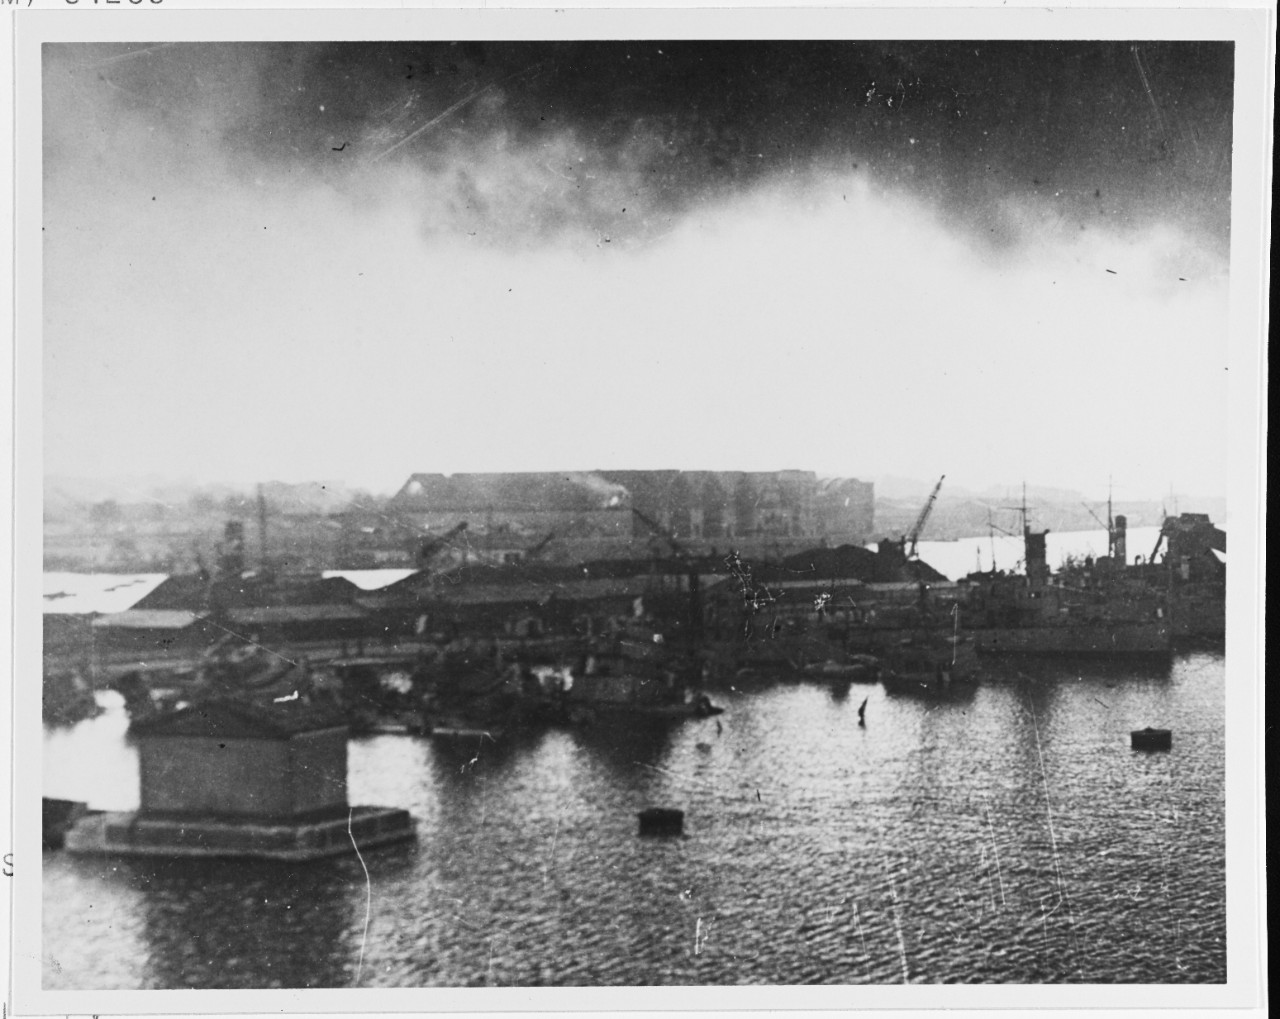 Toulon, France during the scuttling of the French Fleet, November 27, 1942, before the German Occupation. 